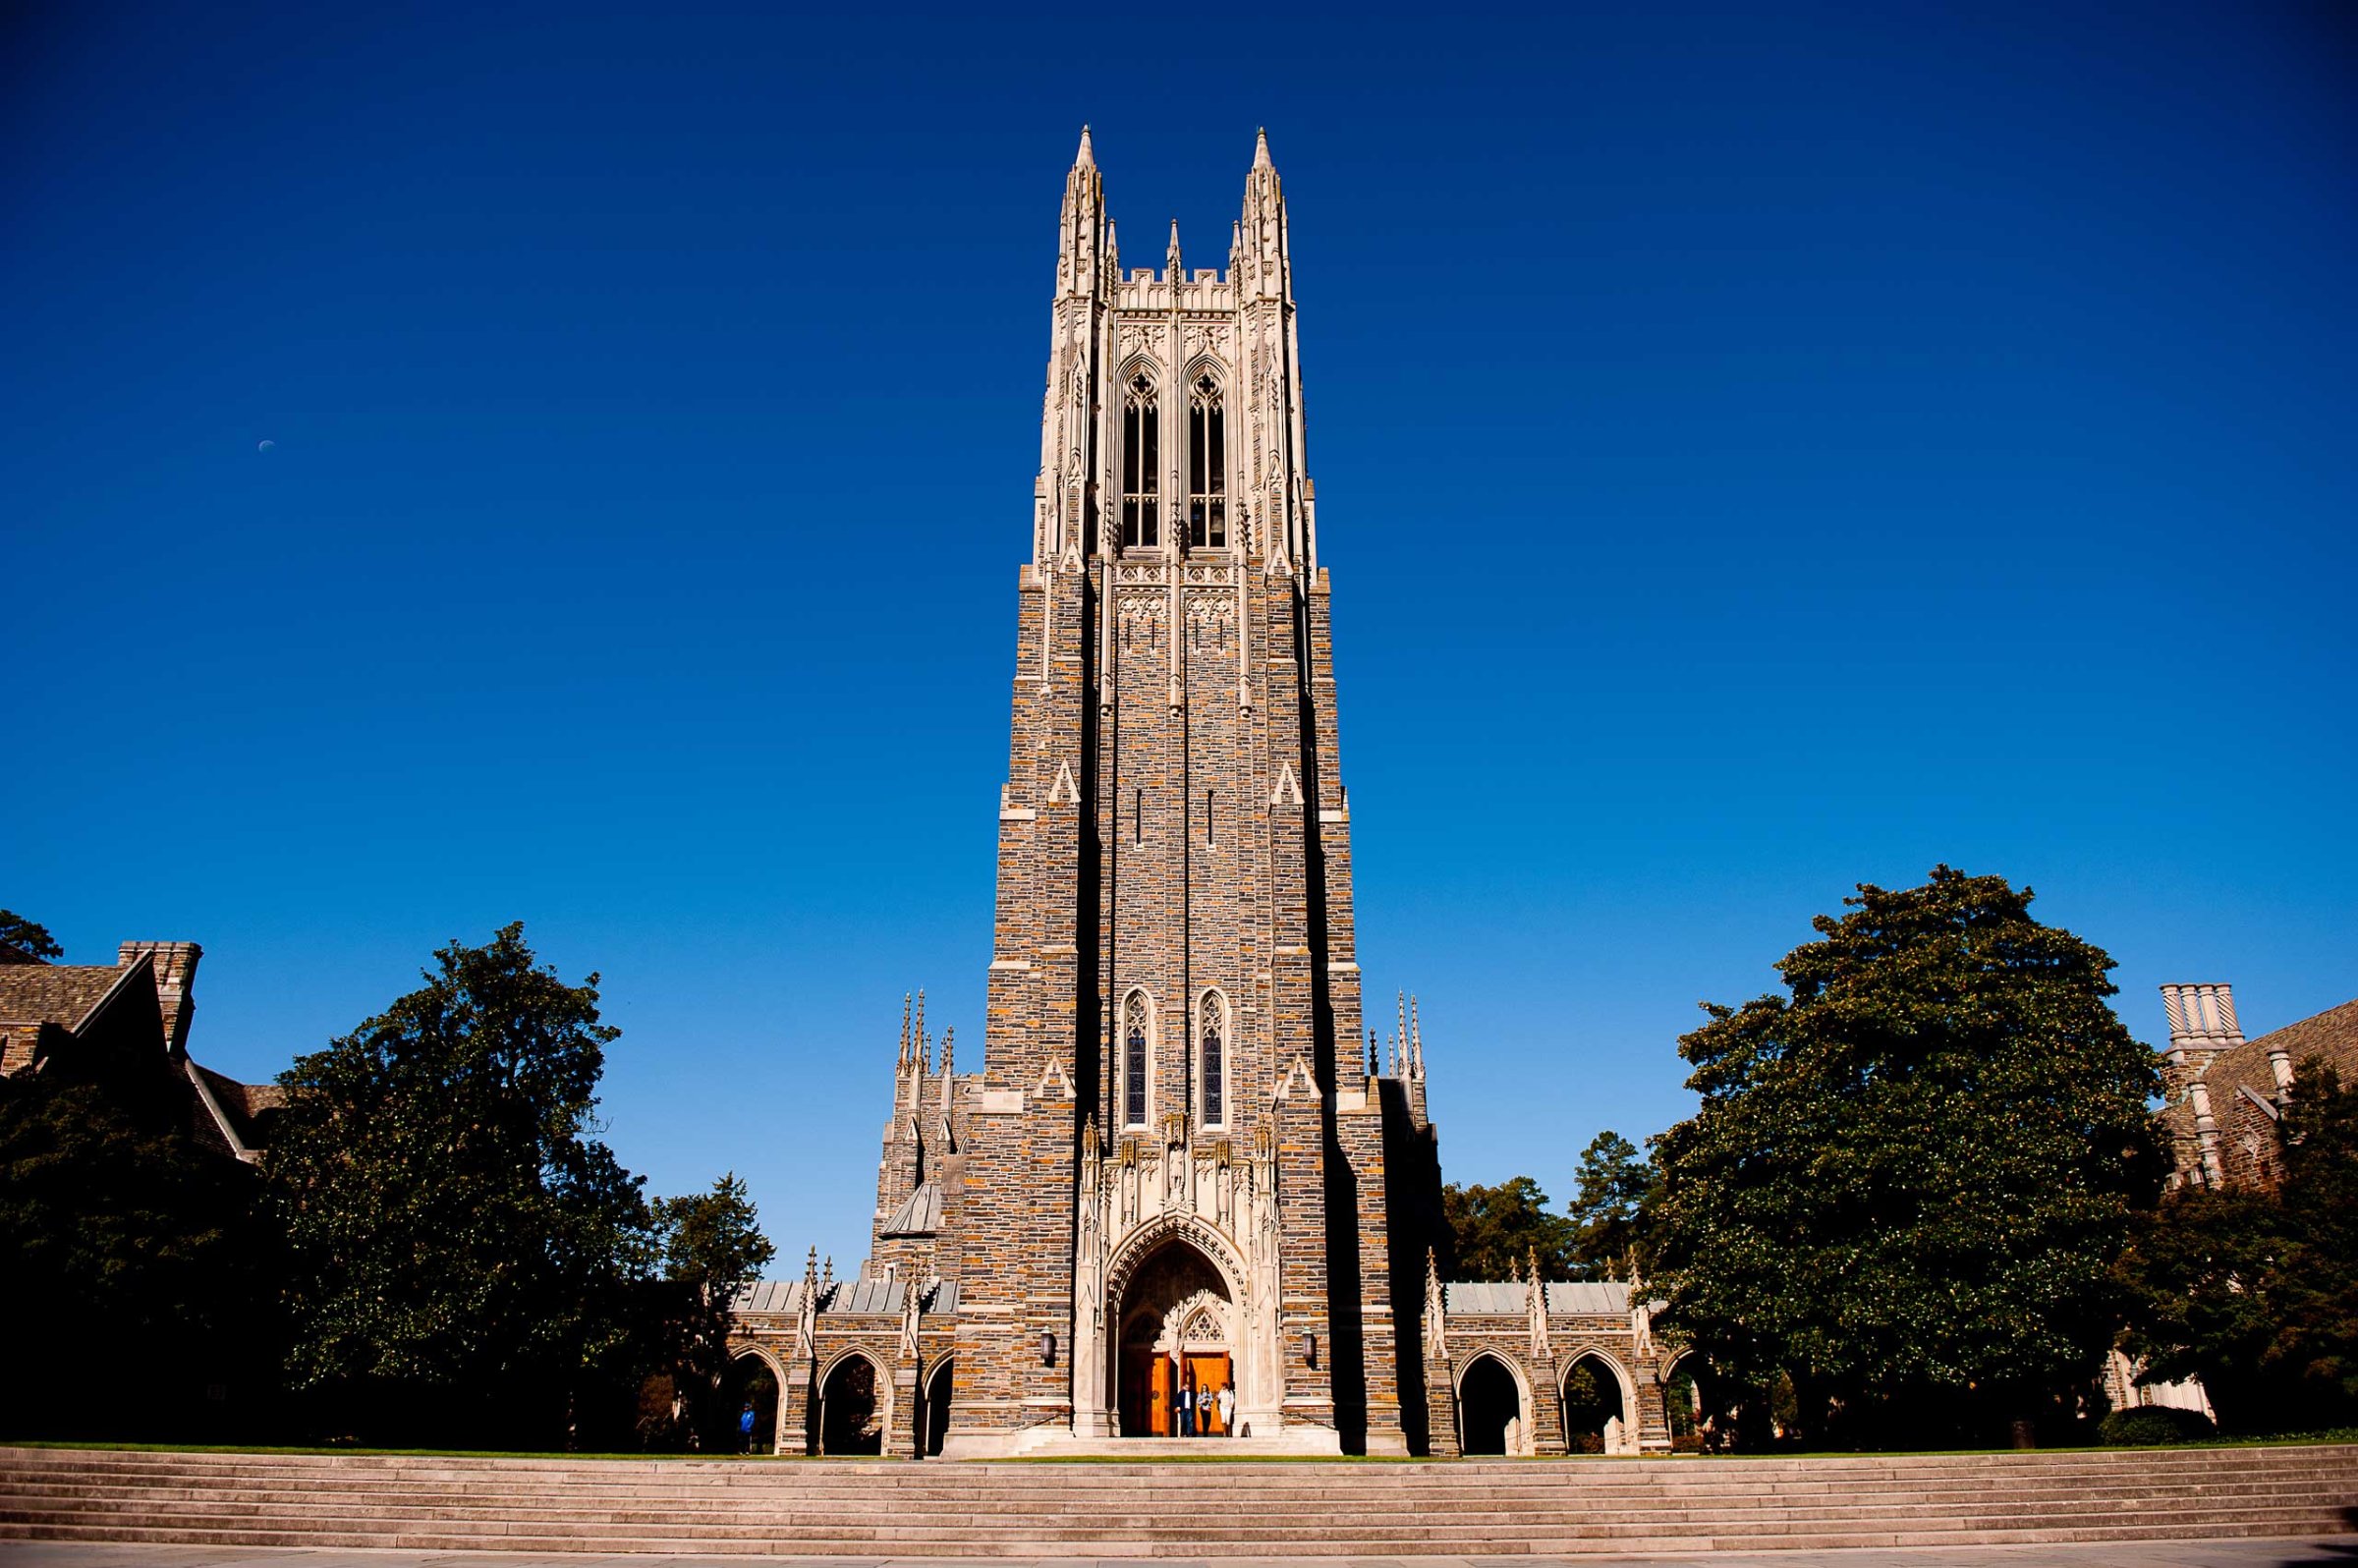 A general view of the Duke University Chapel on campus of Duke University in Durham, N.C.